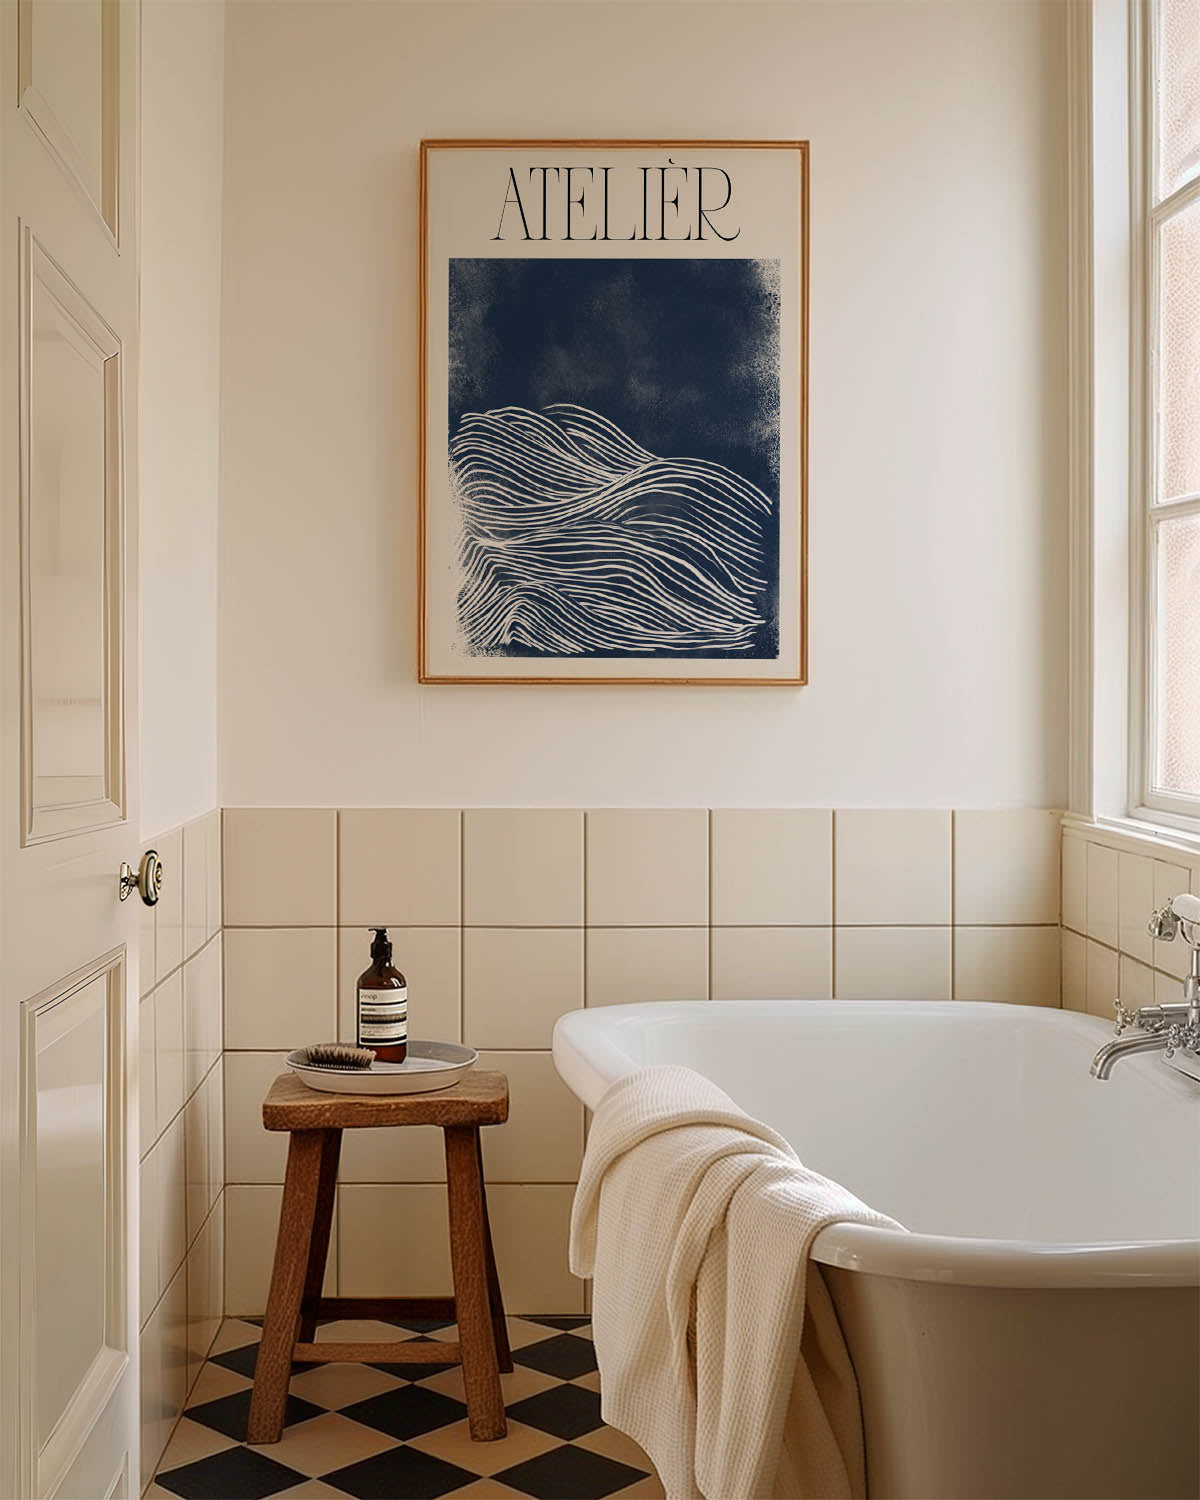 A minimalist poster titled 'ATELIER' with white linear patterns creating abstract waves on a textured deep blue background, ideal for modern and sophisticated interior decor.